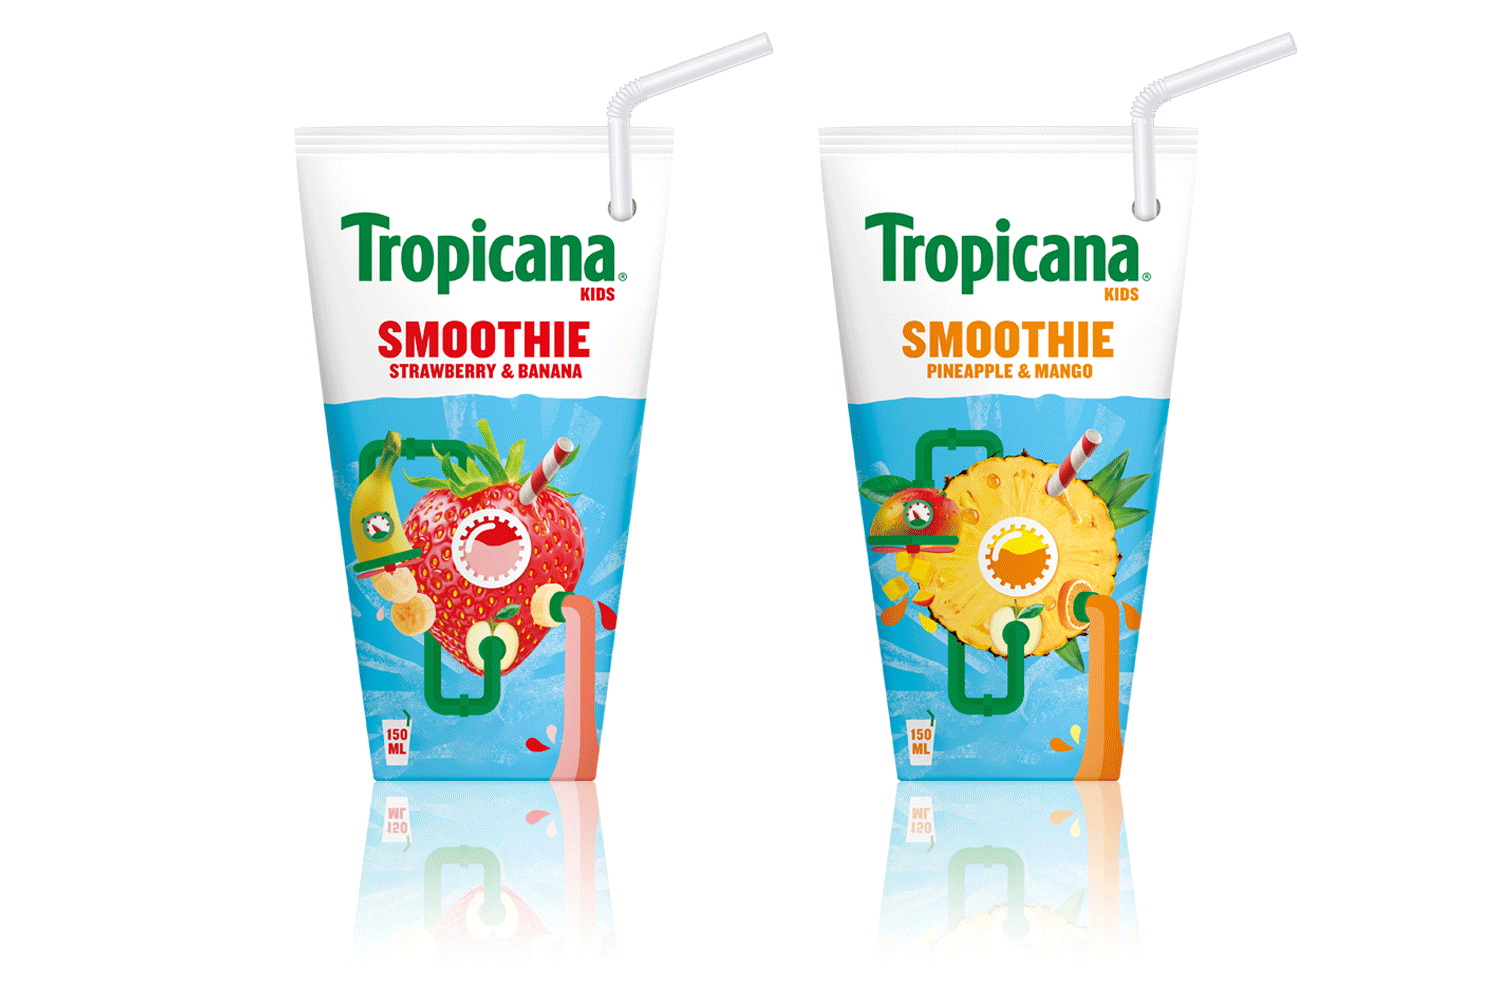 It’s THAT tasty on the go Smoothie. Give them 1 of their 5 a day with Tropicana Kids Strawberry & Banana Smoothie.